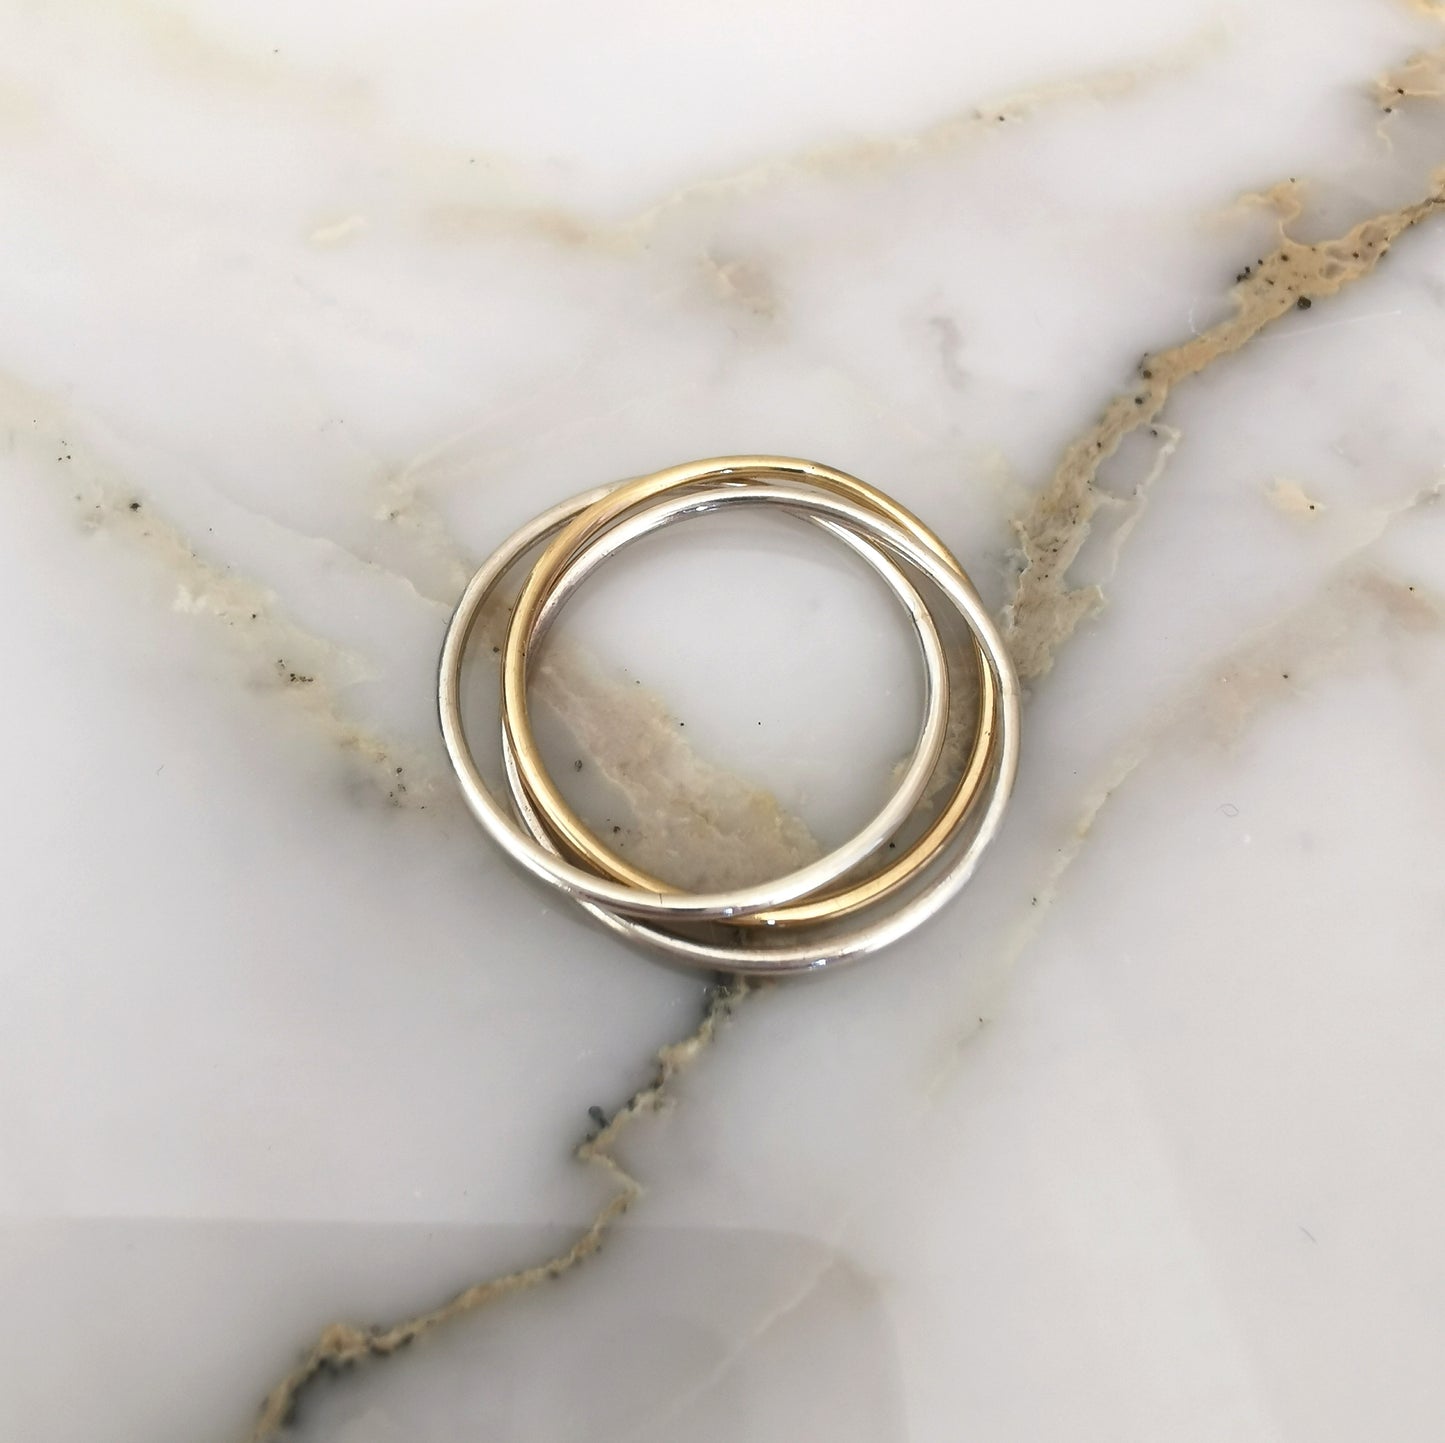 Russian Ring with 2 Silver Bands and 1 9ct Yellow Gold Band